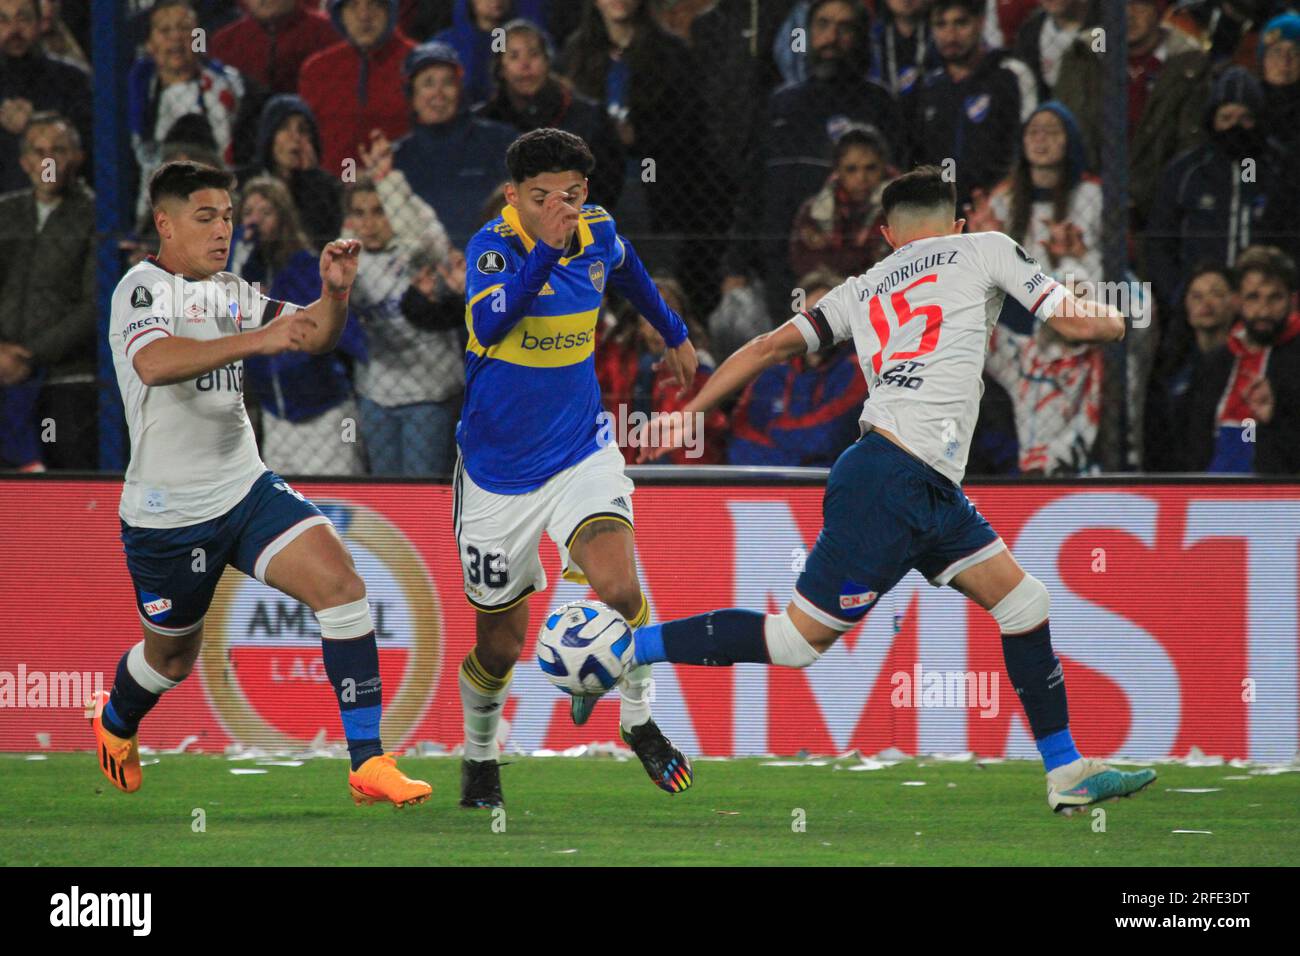 Montevideo, Uruguay. 02nd Aug, 2023. Leandro Lozano, Diego Rodríguez of Nacional battles for possession ball with Cristian Medina of Boca Juniors, during the match between Nacional and Boca Juniors for the 1st leg of round 16 of Copa Conmebol Libertadores 2023, at Gran Park Central Stadium, in Montevideo, Uruguay on August 02. Photo: Pool Pelaez Burga/DiaEsportivo/DiaEsportivo/Alamy Live News Credit: DiaEsportivo/Alamy Live News Stock Photo